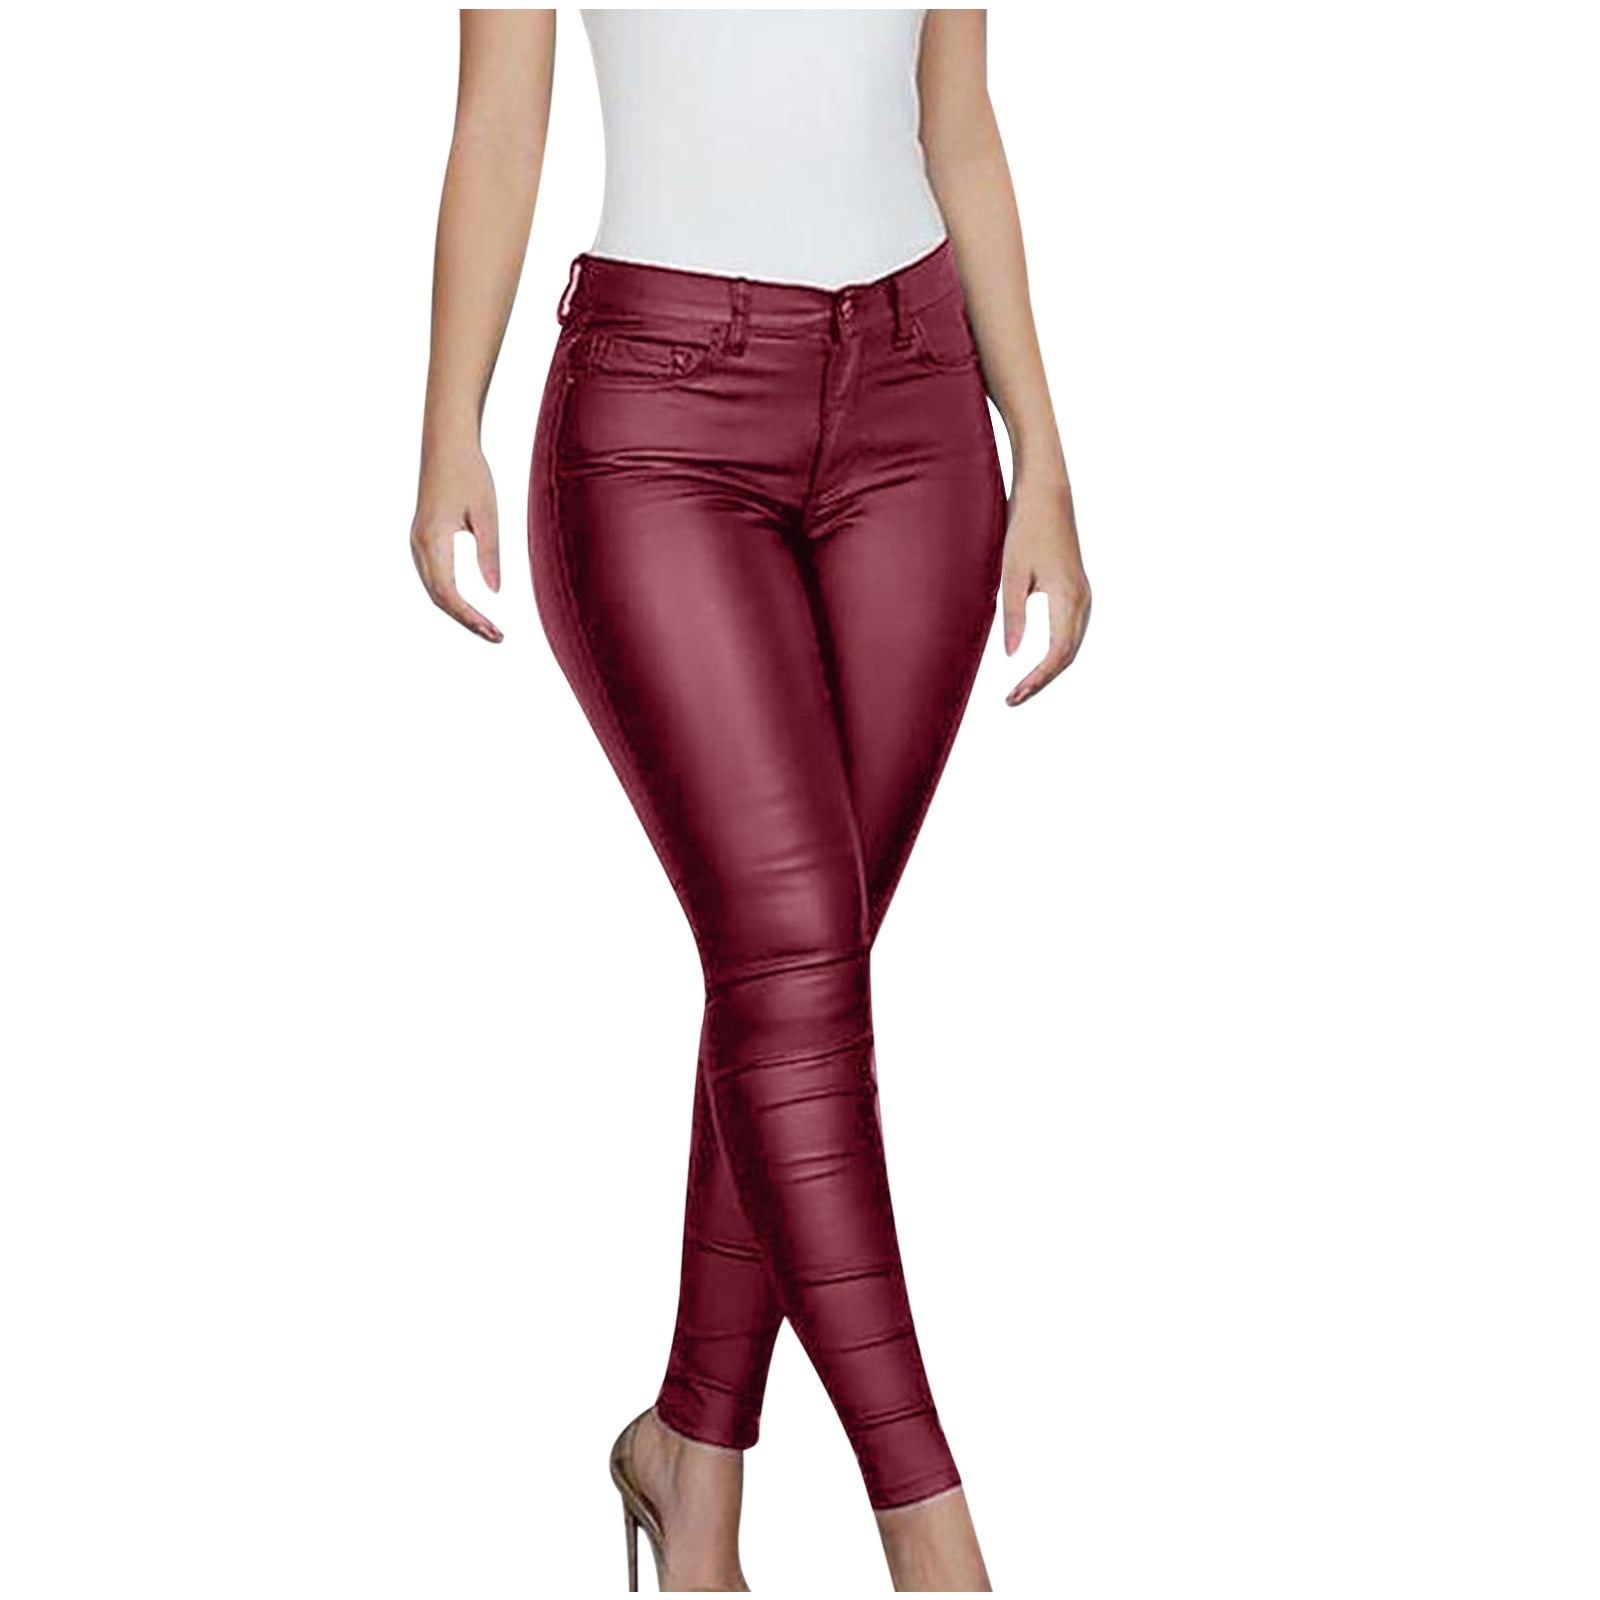 Melody Burgundy Faux Leather Trousers Low Rise Leather Pants Petite  Jeggings Women Push Up Butt Cool Leggings New Style Trousers - AliExpress